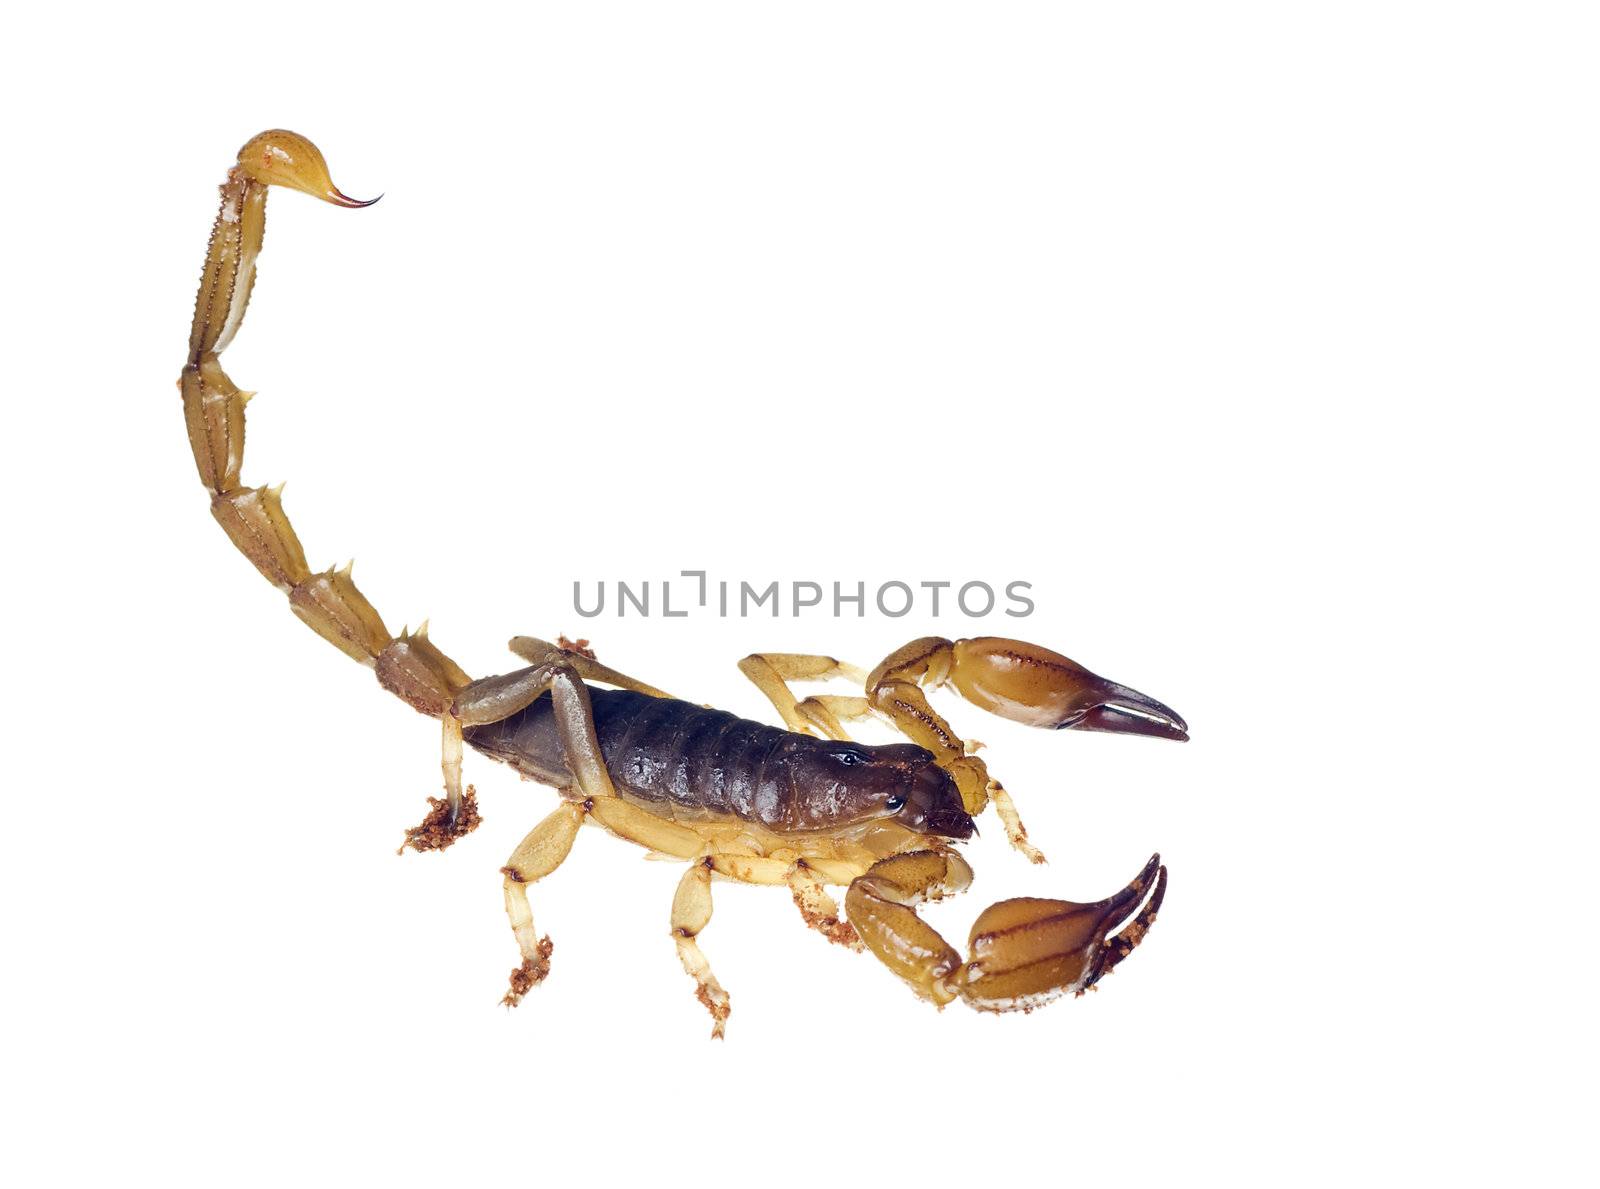 An Australian scorpion Urodacus sp. with its tail up ready to sting. Isolated over white with clipping path 